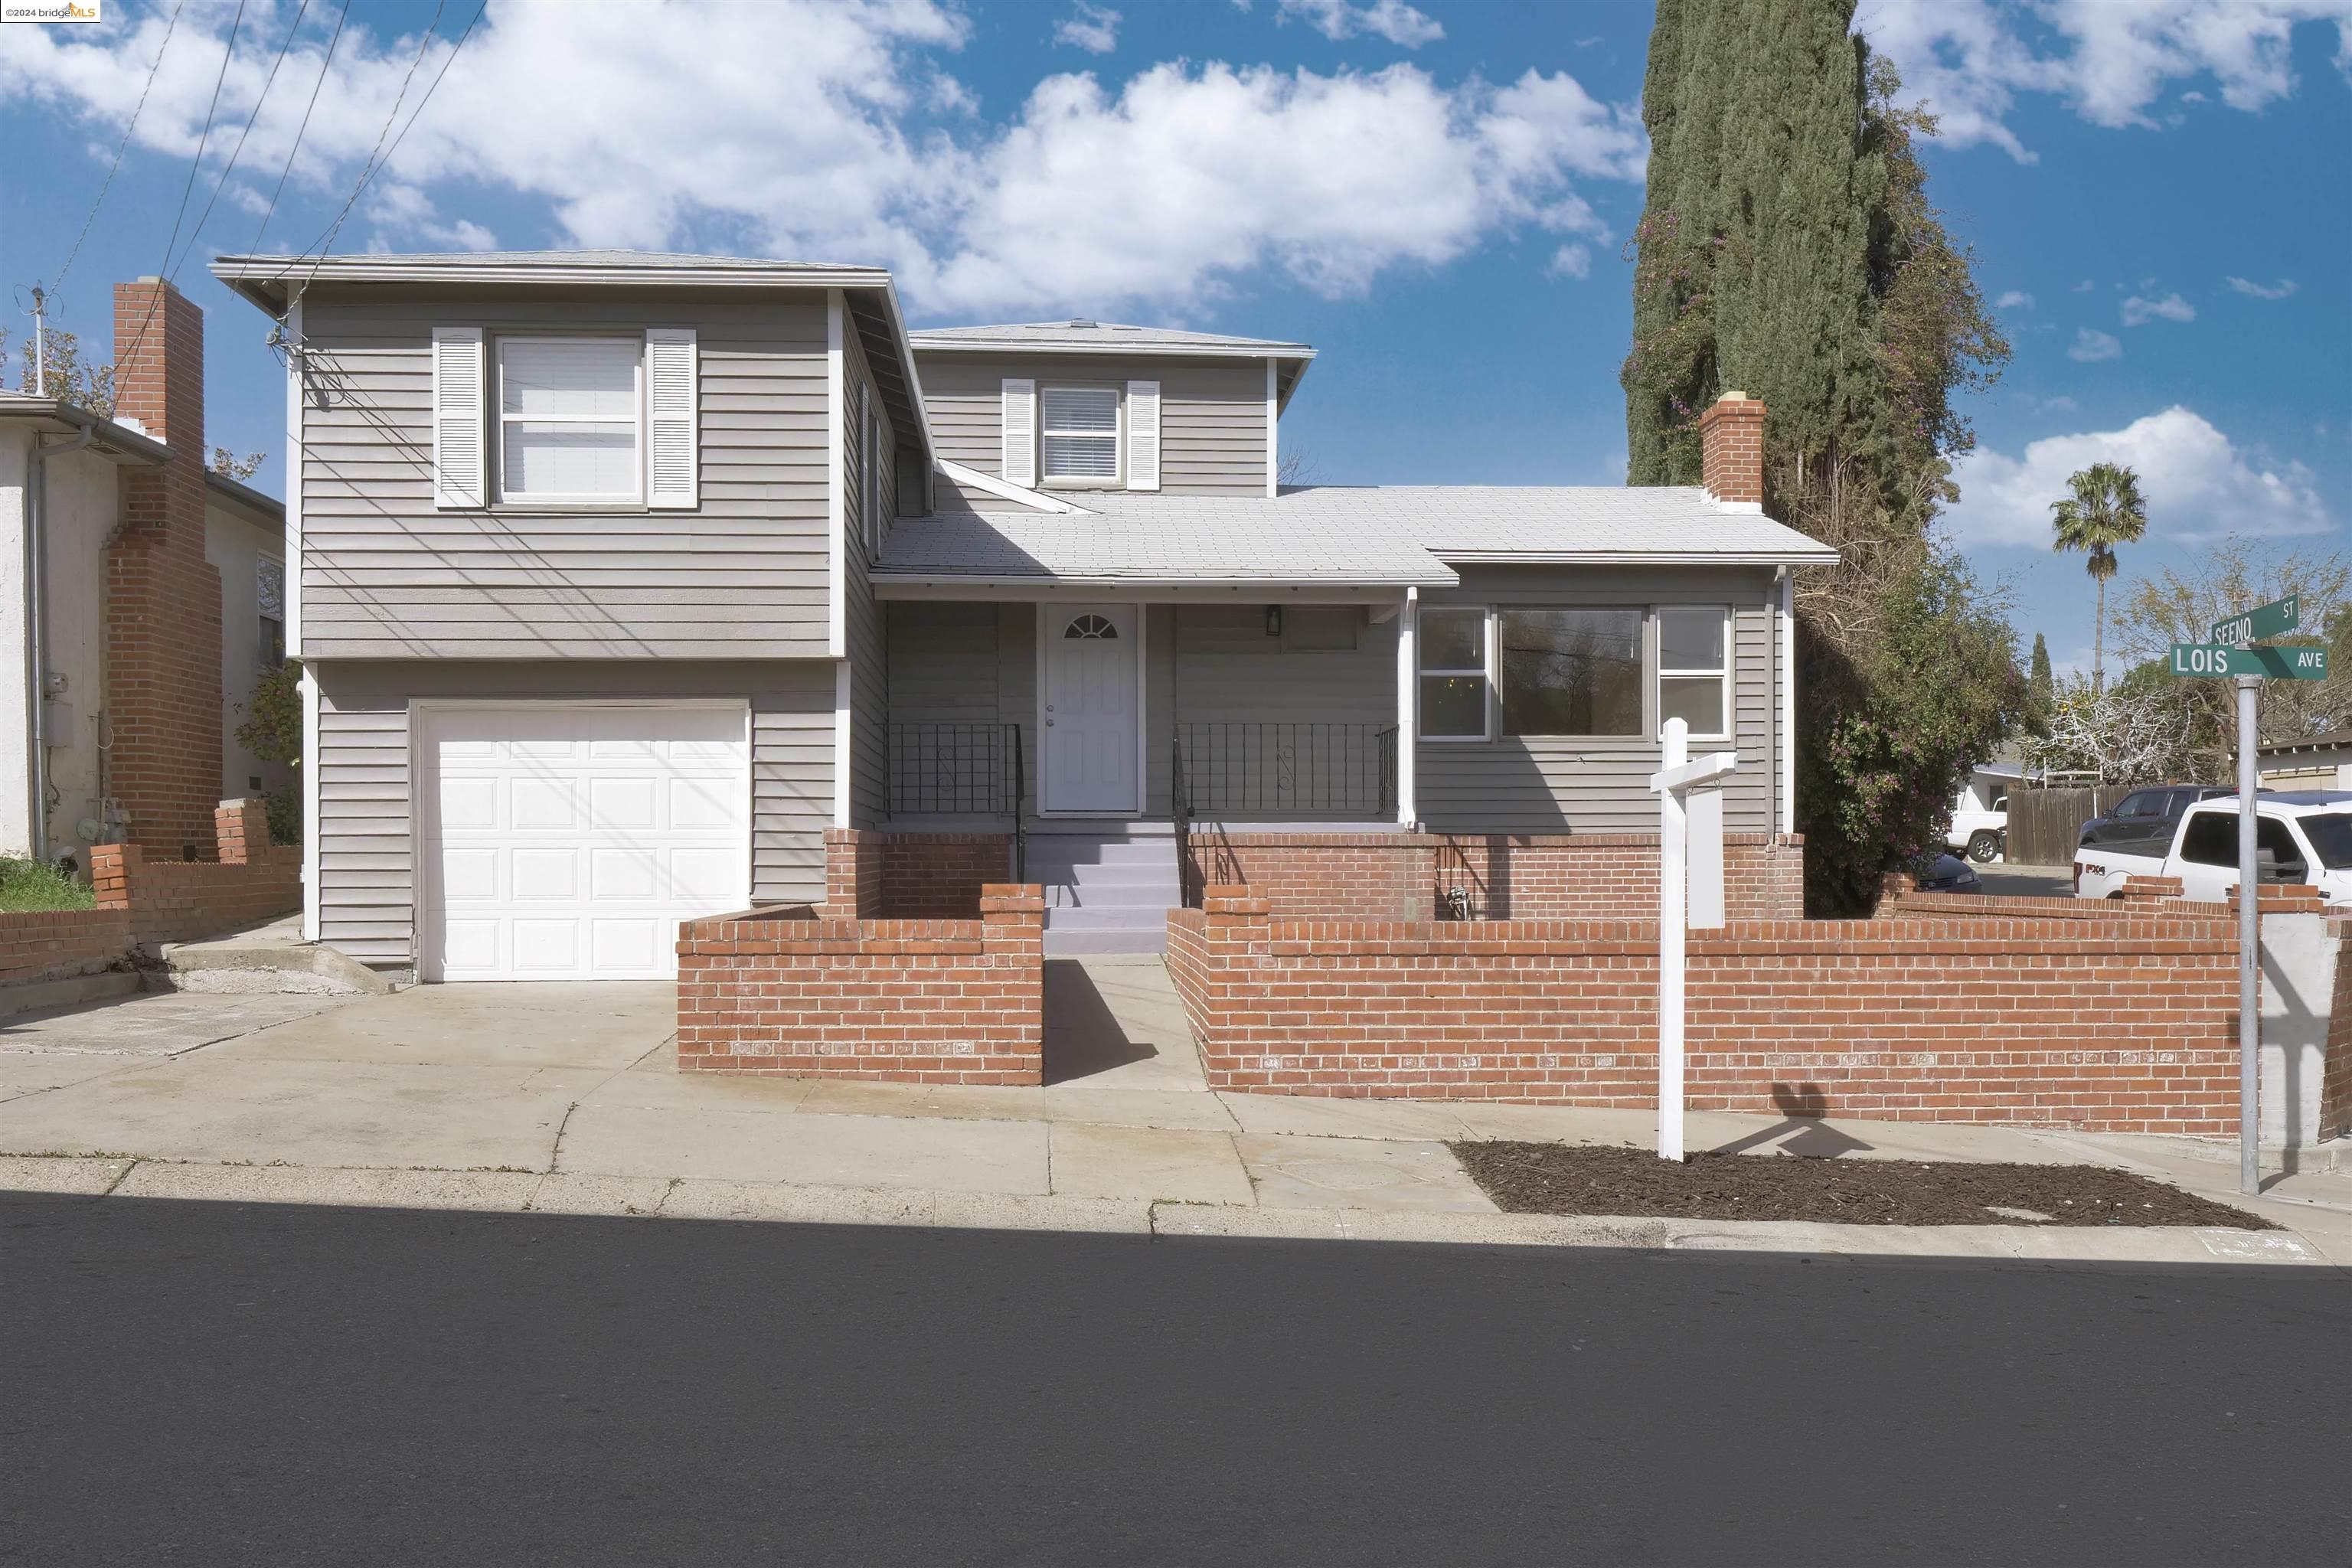 108 Lois Ave, Pittsburg, CA 